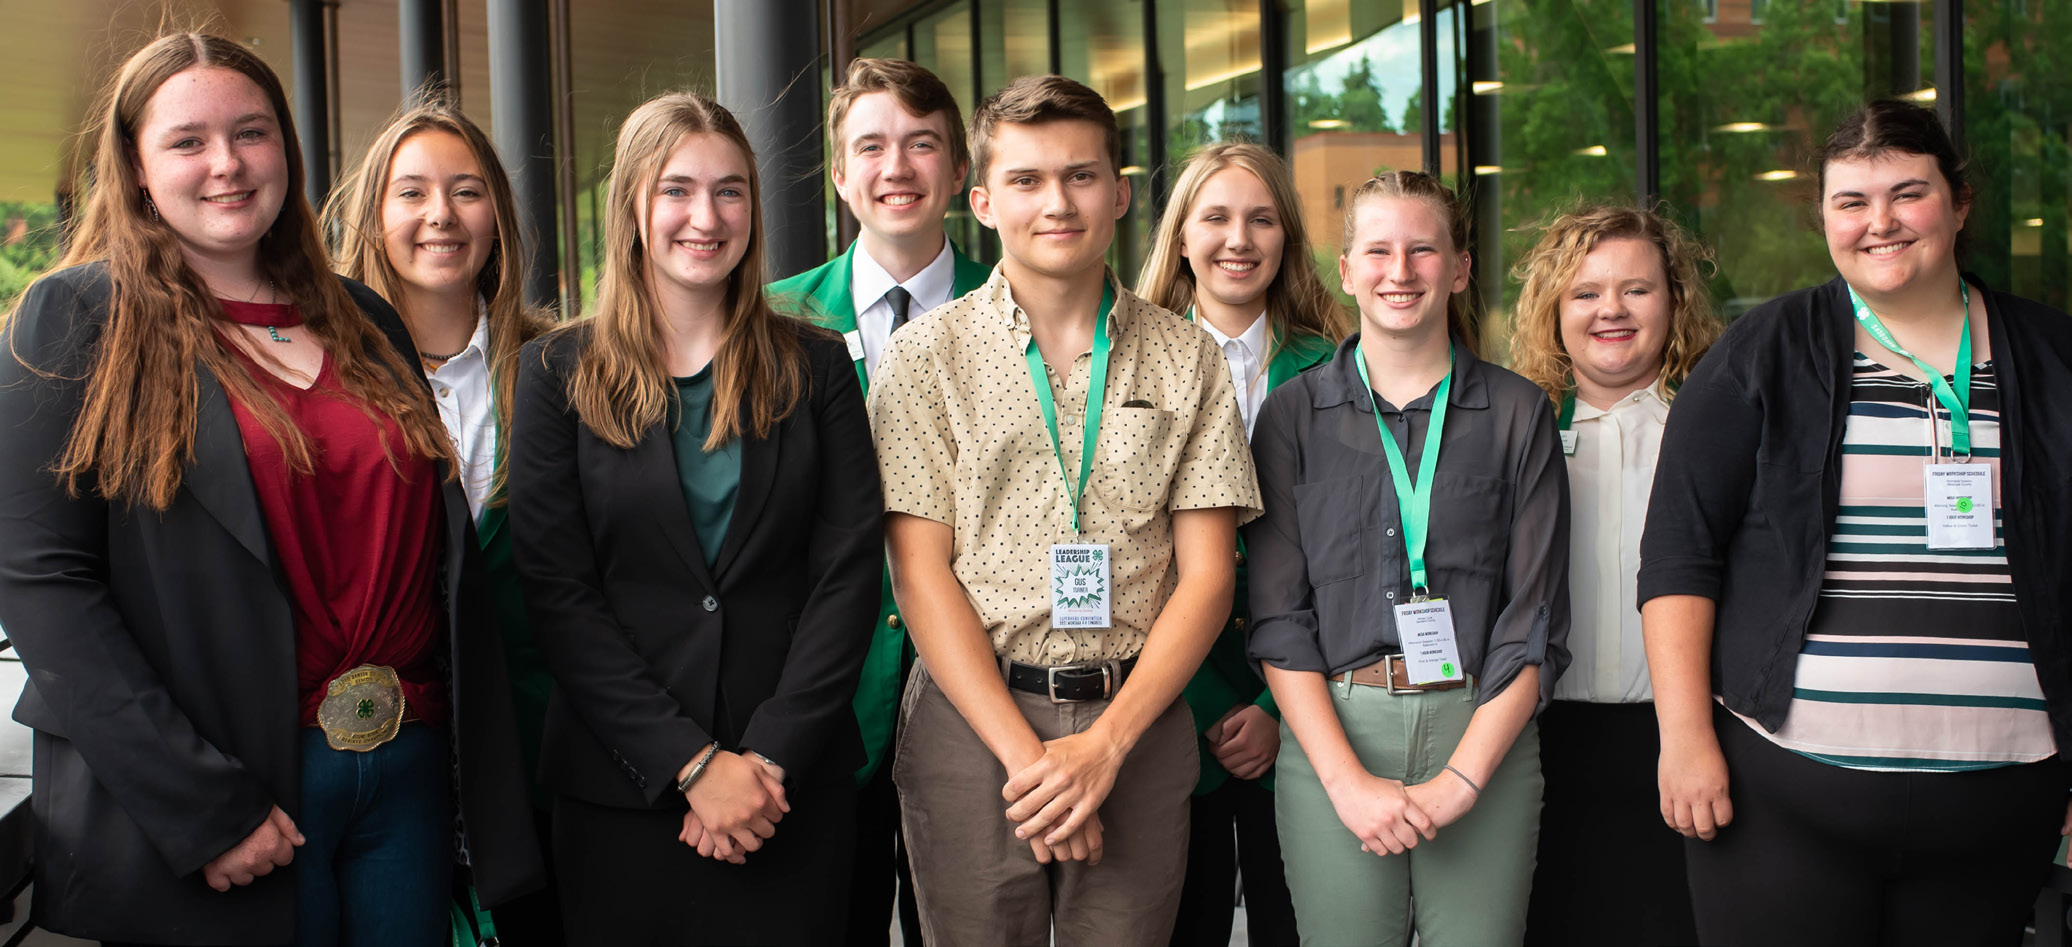 4-H Members at a conference.